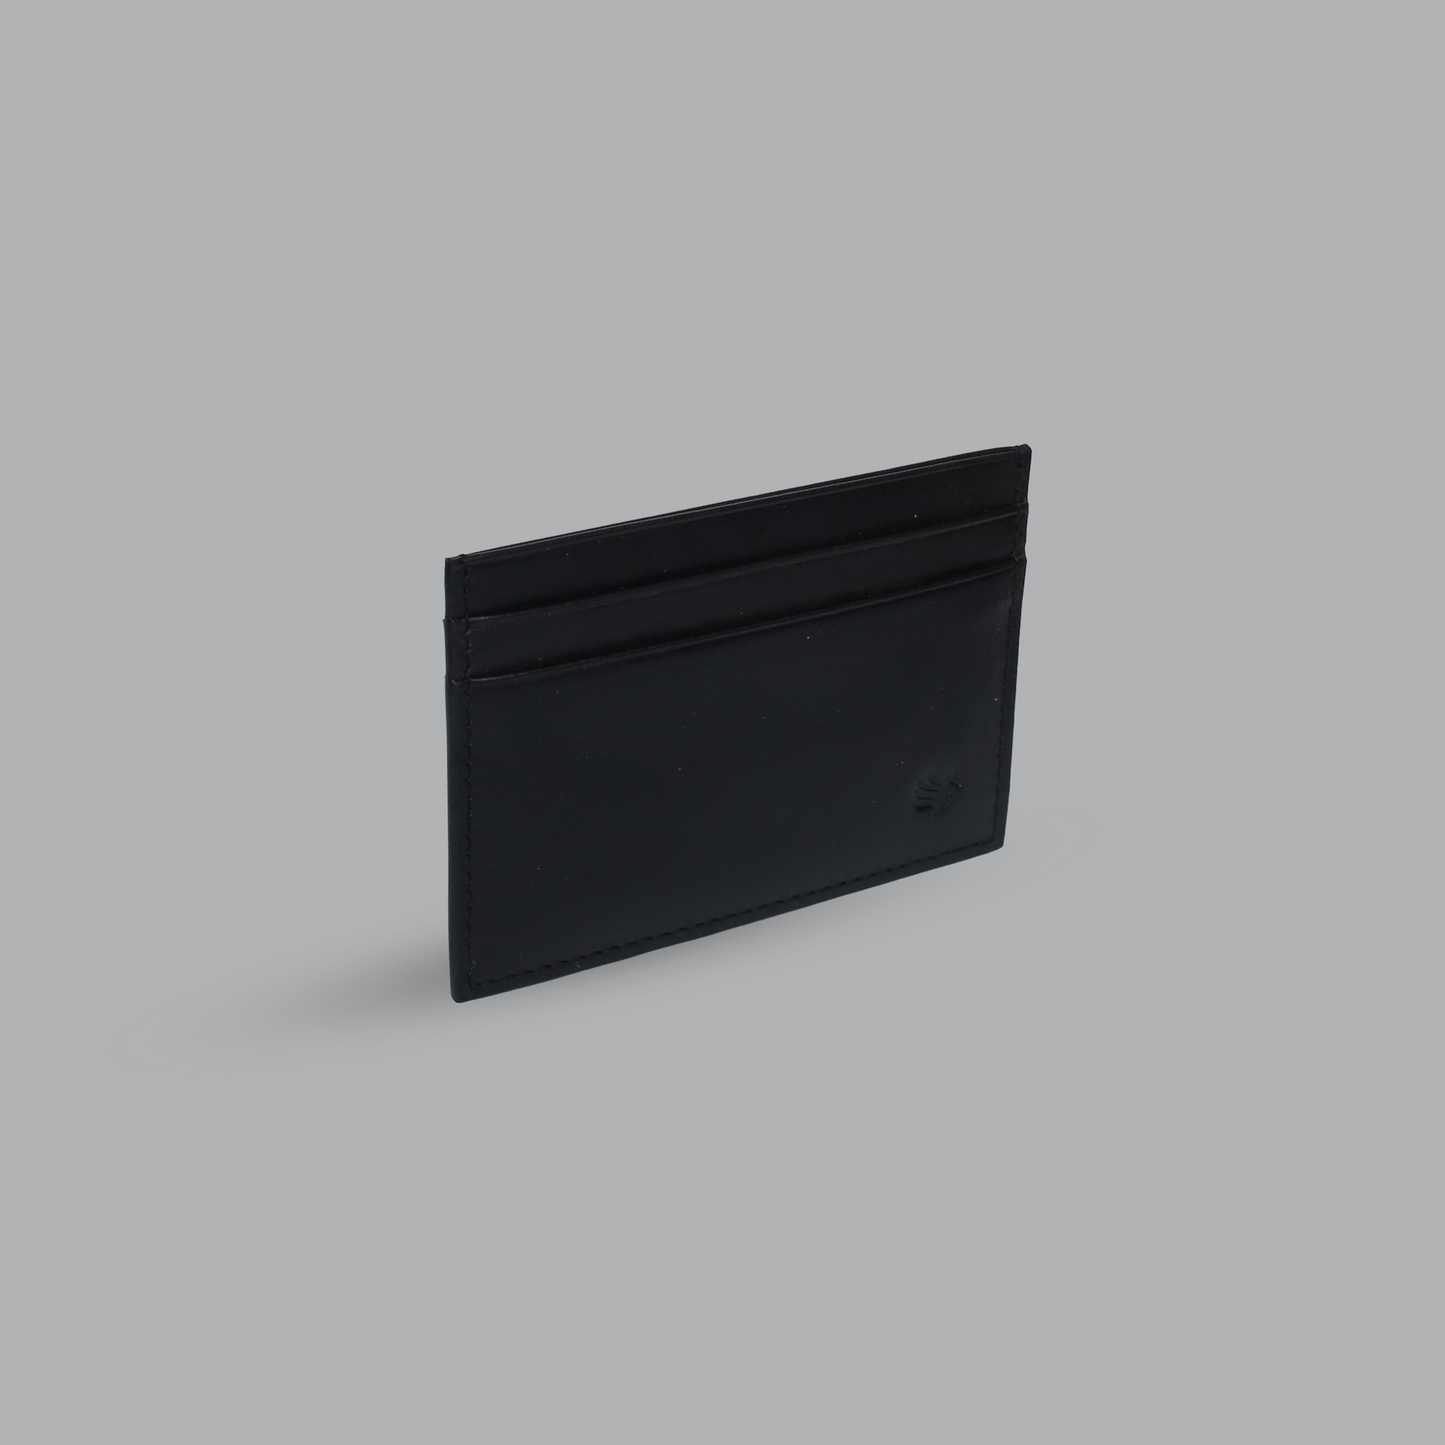 Card Case - Free Gift